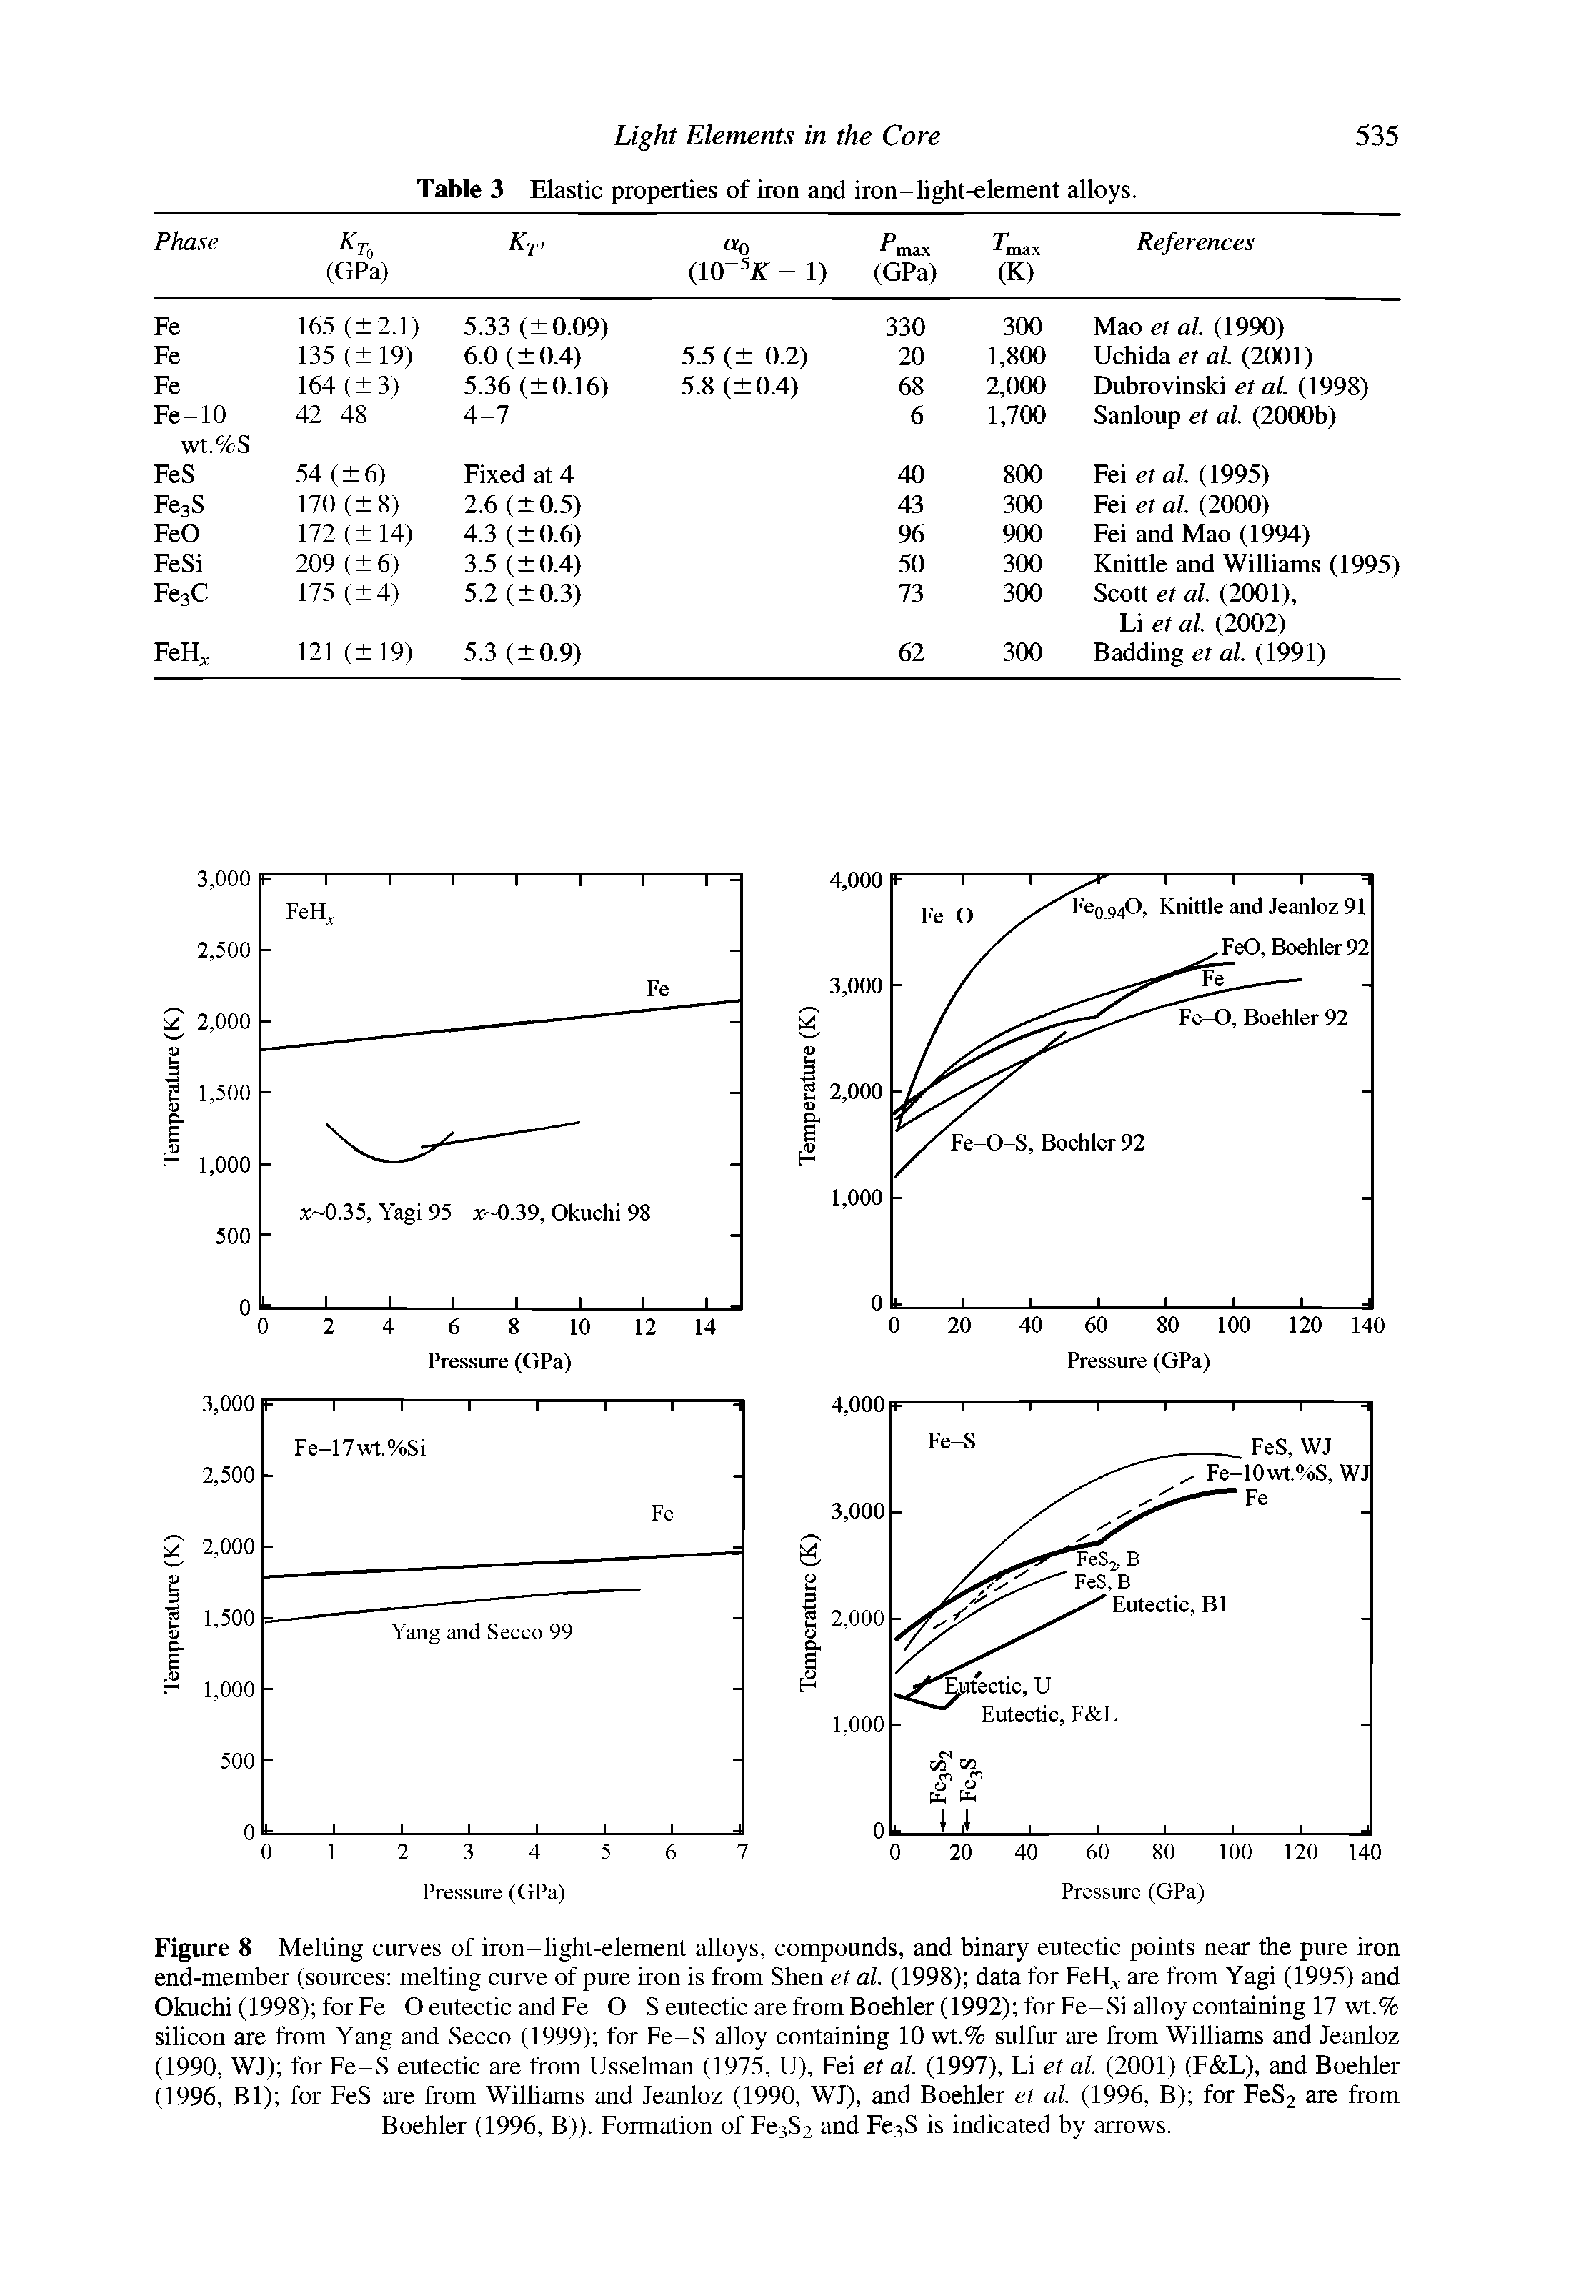 Table 3 Elastic properties of iron and iron-light-element alloys.